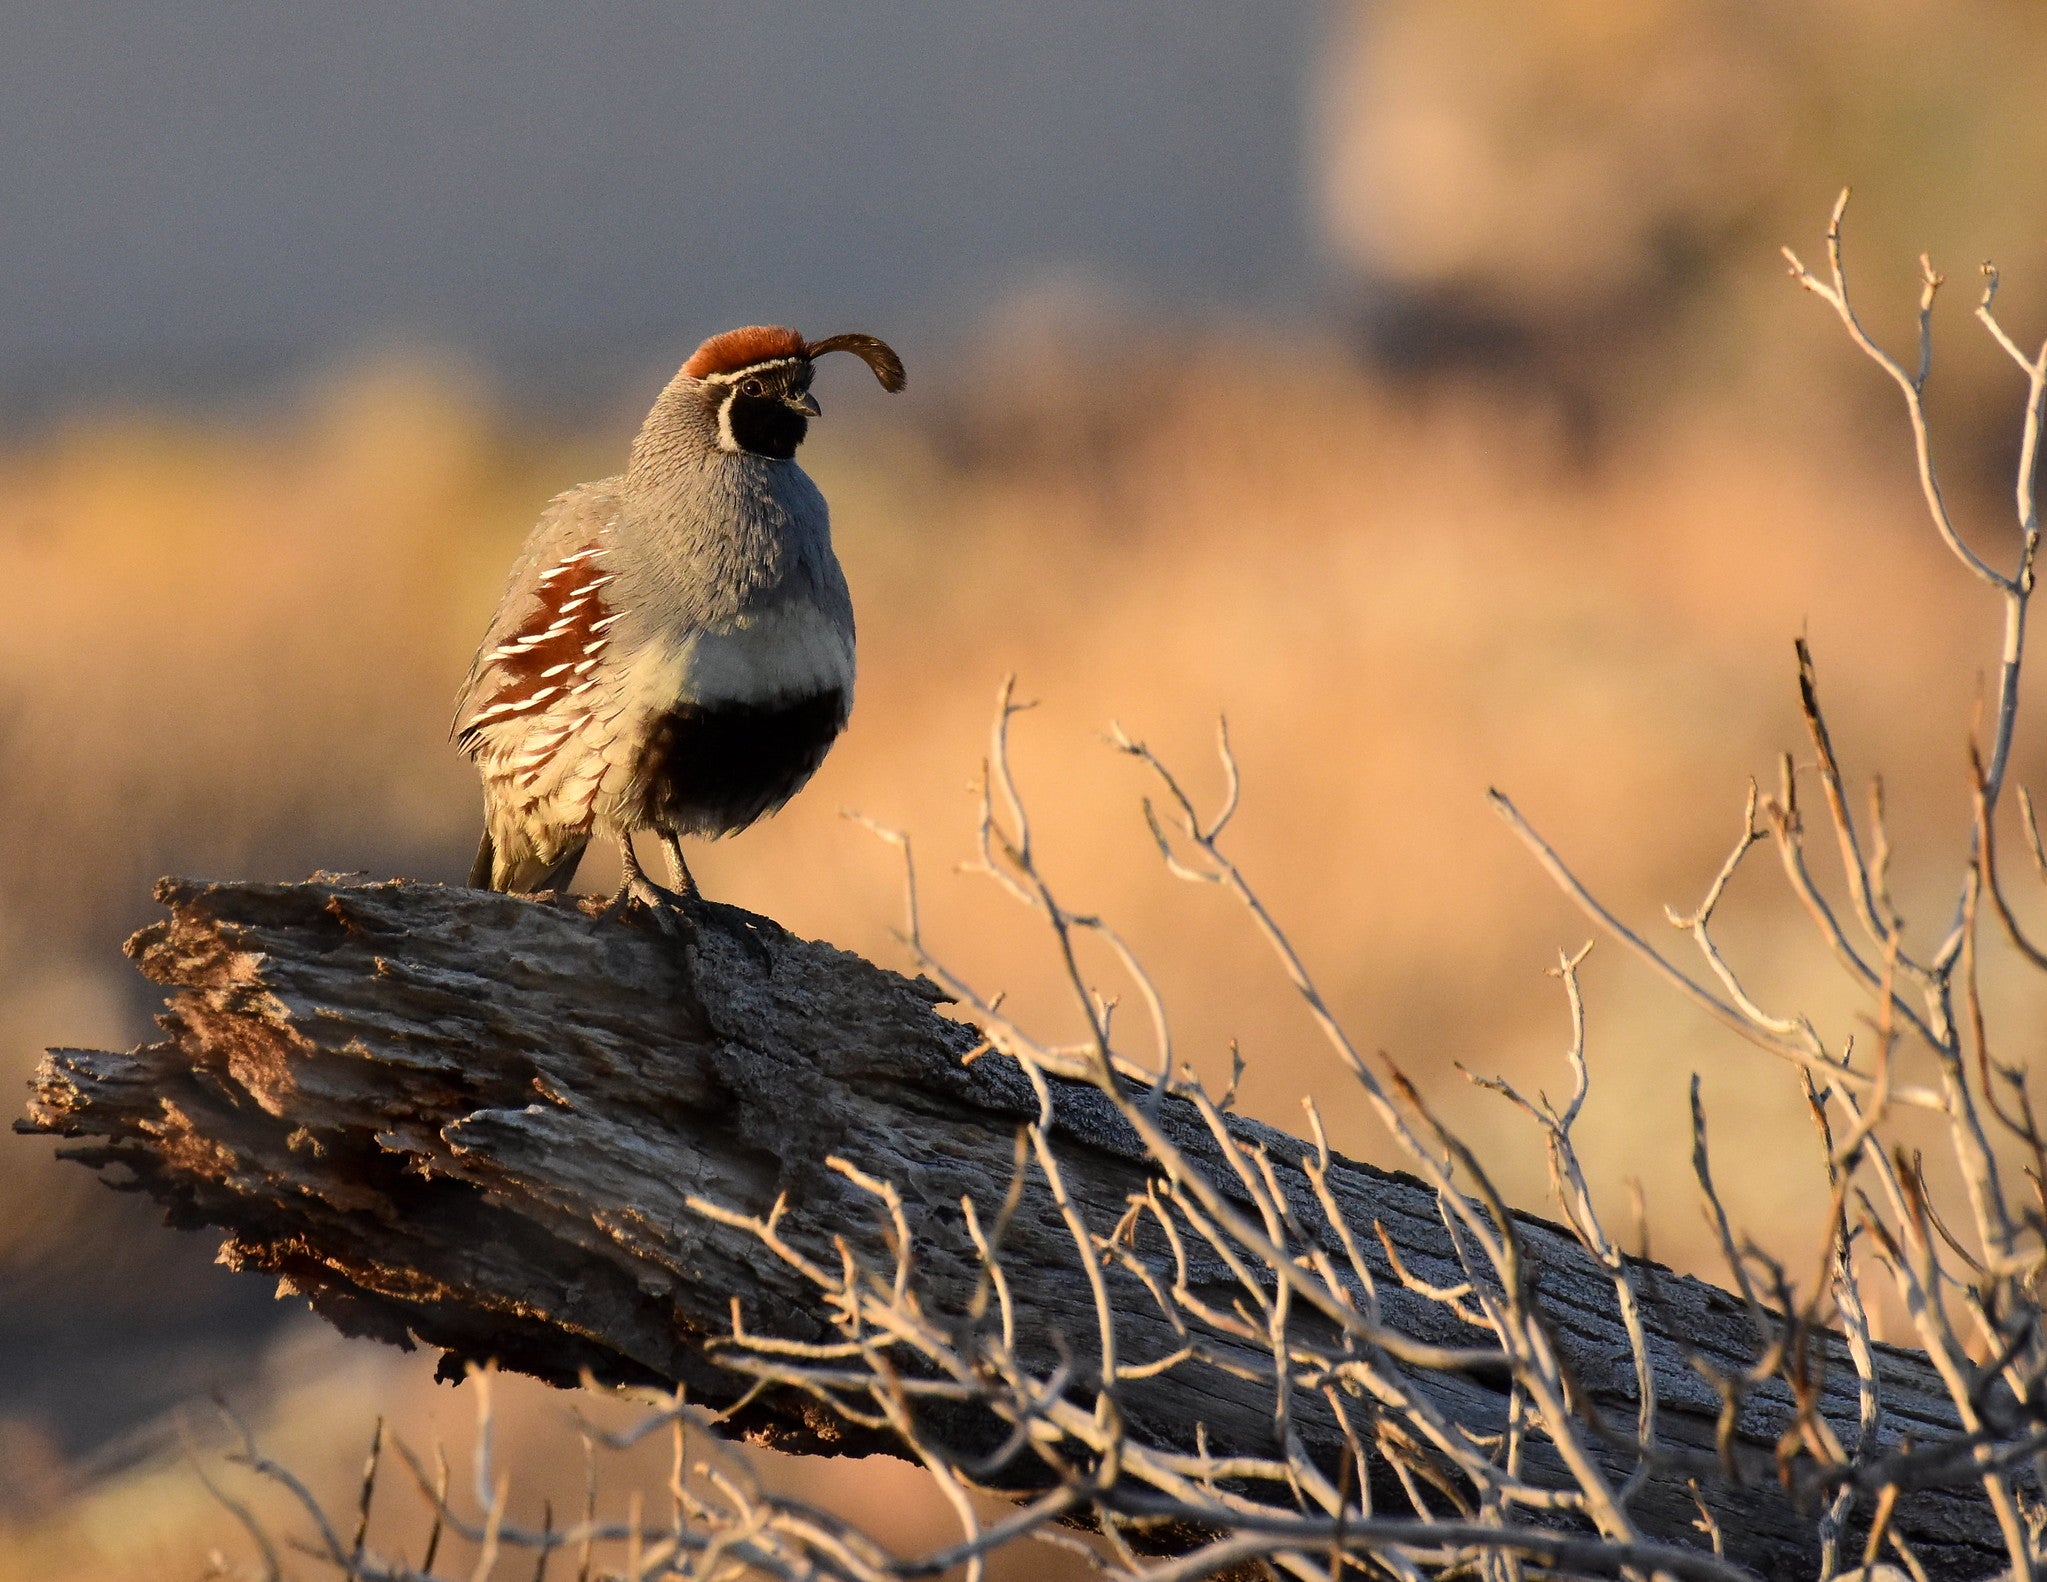 A gambel's quail sits ona. log in the evening sunshine.